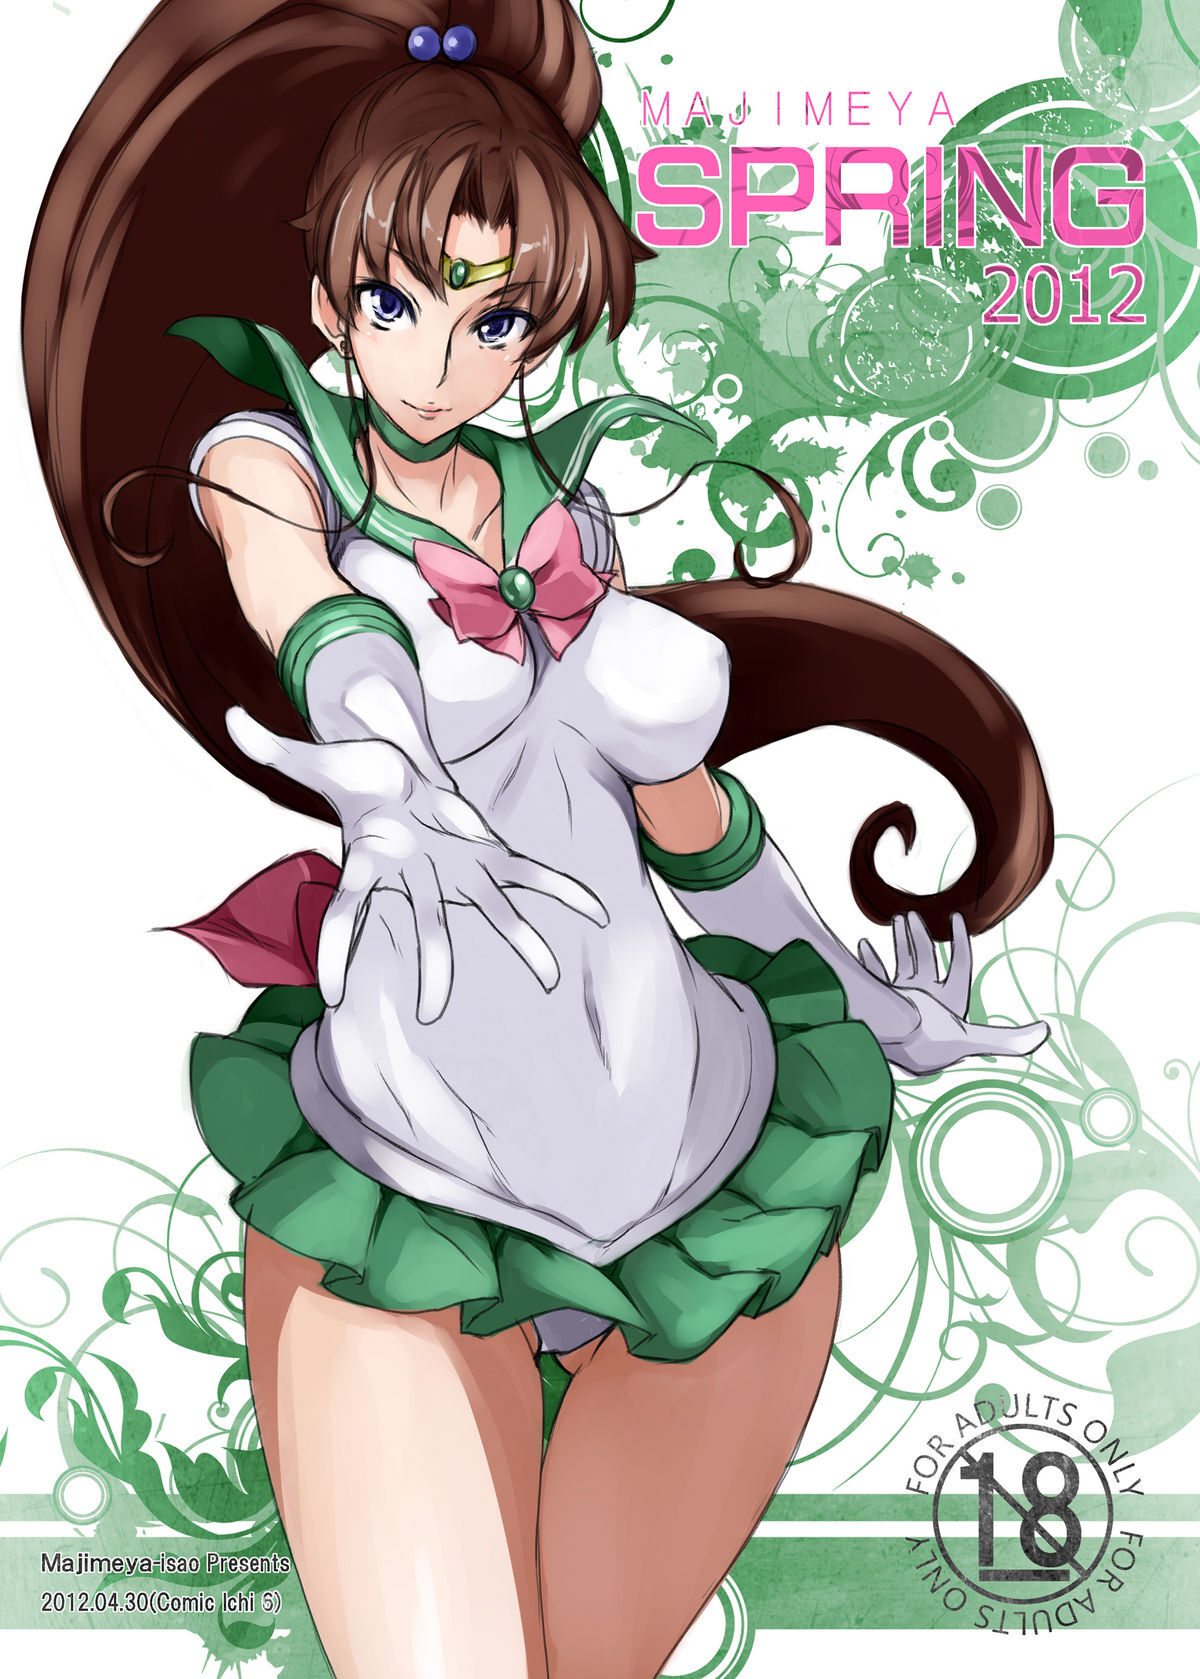 sailor jupiter - sorted by number of objects